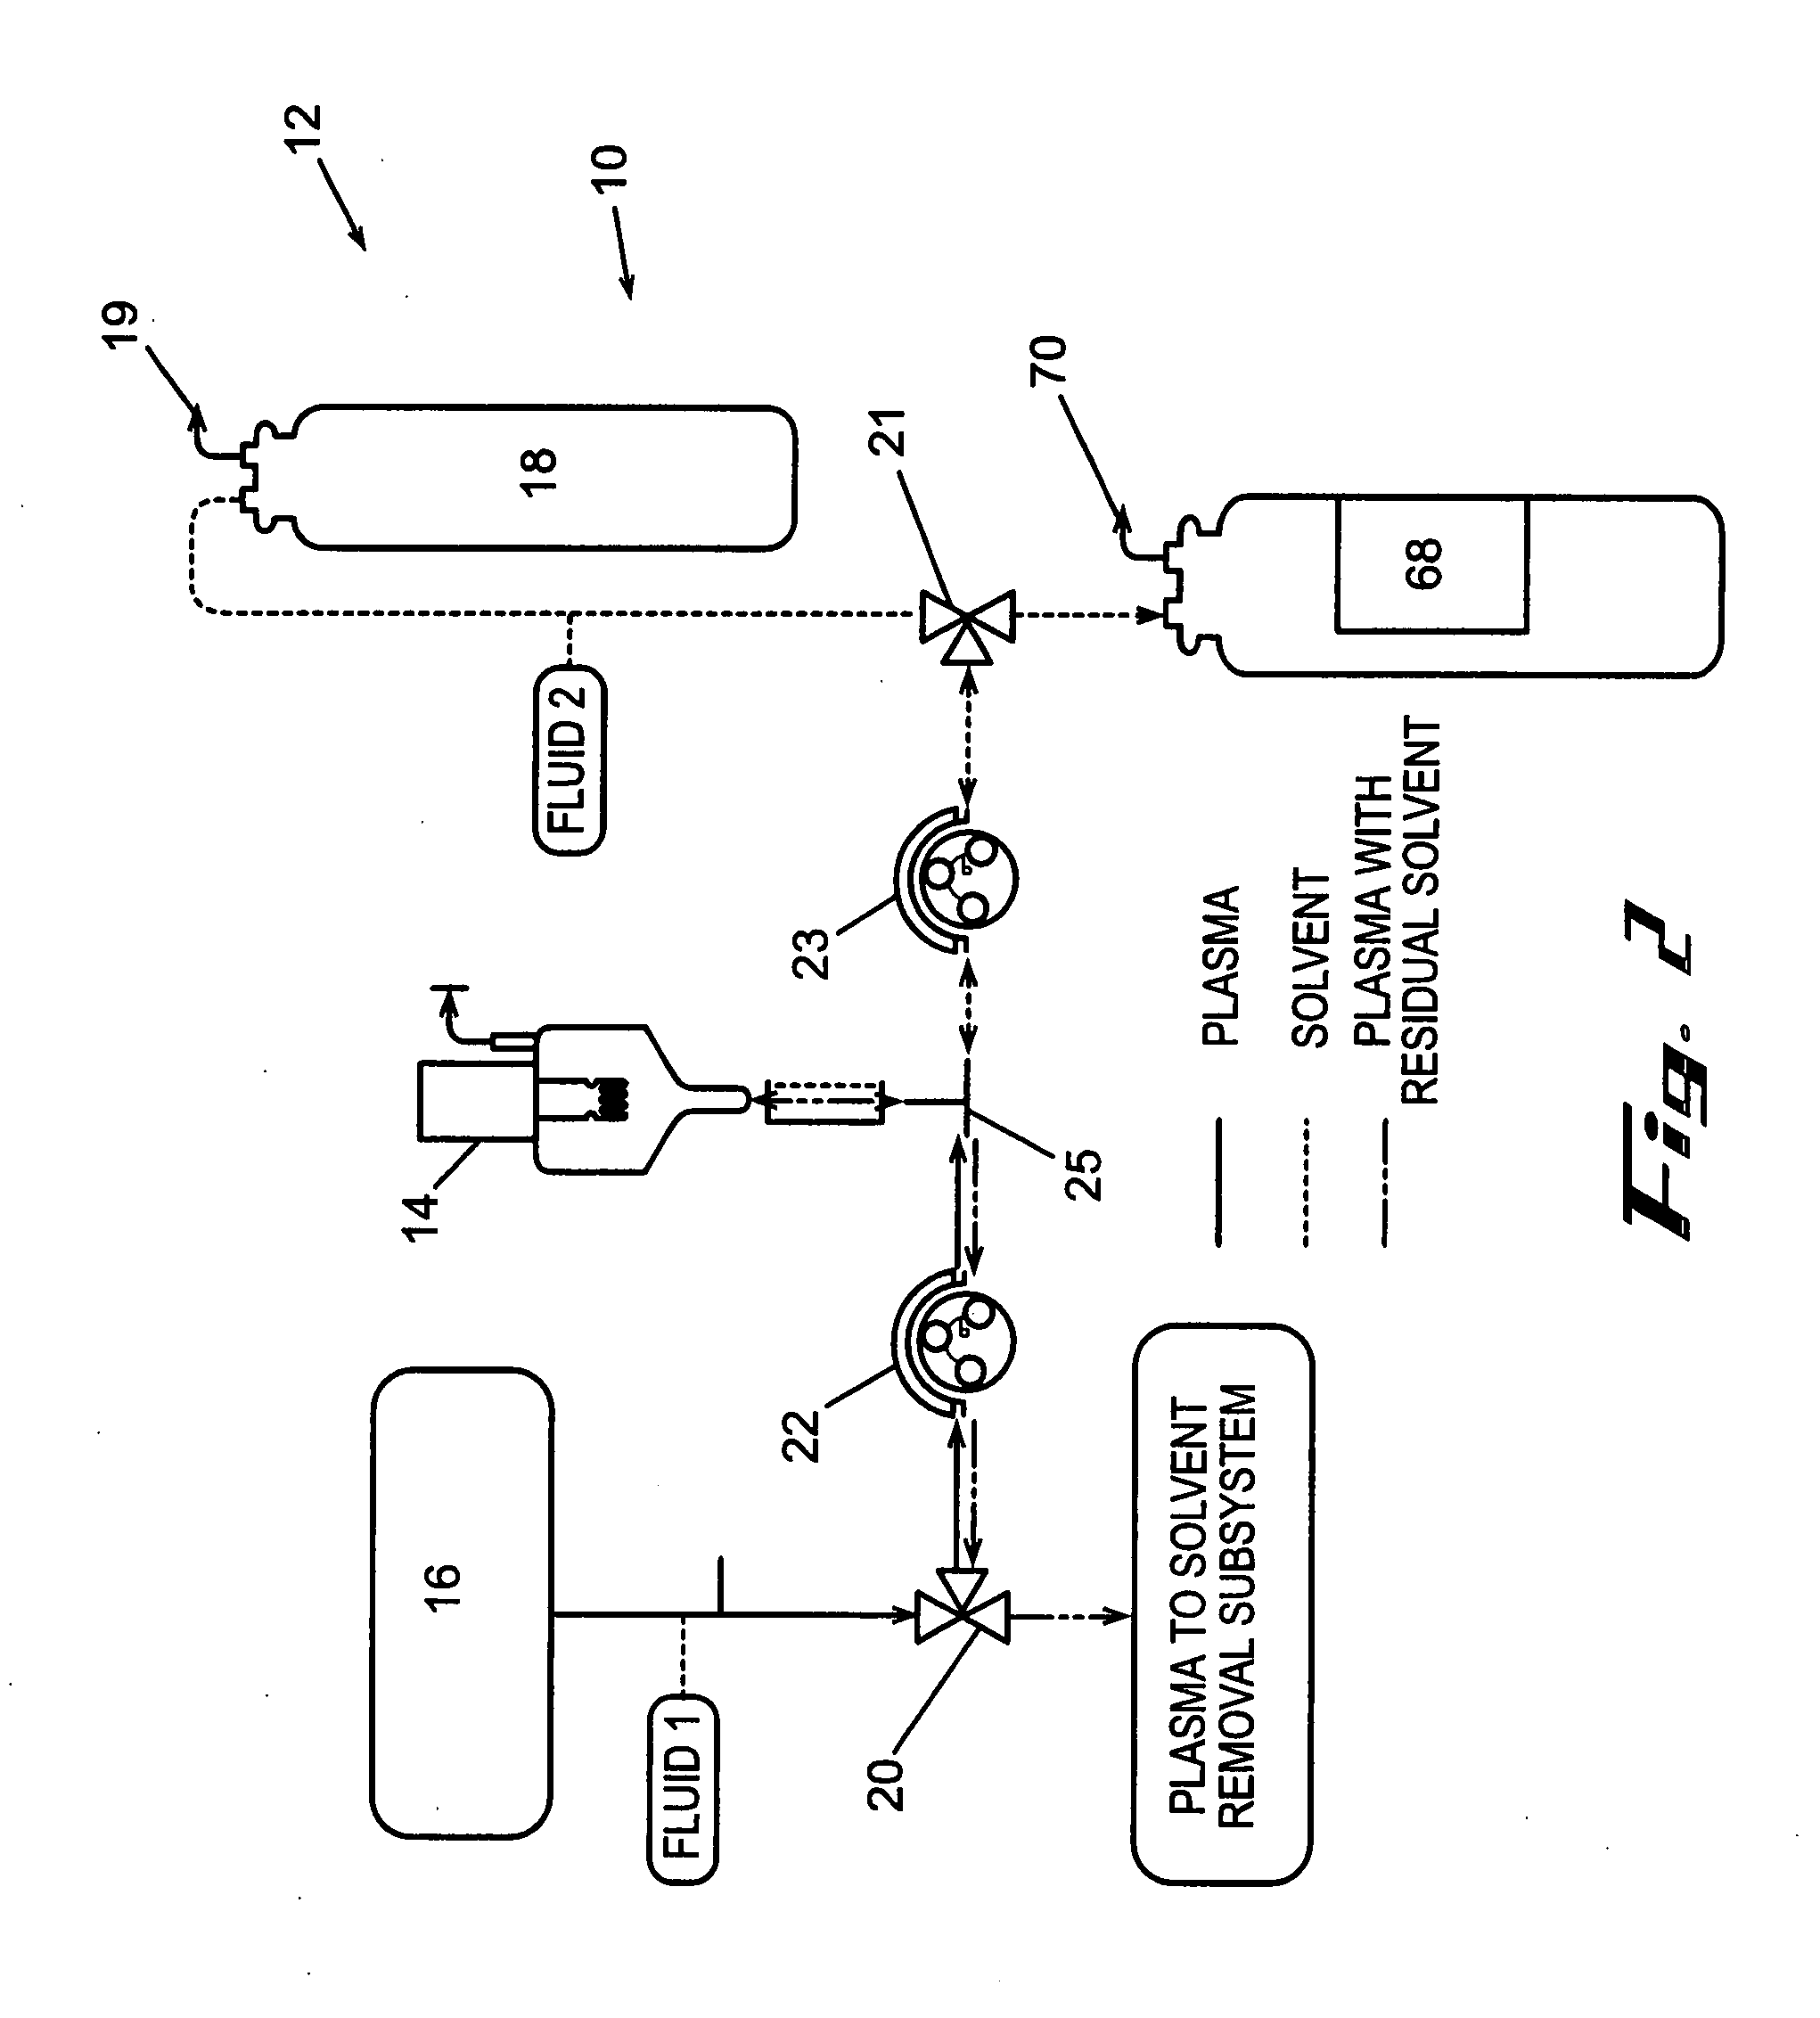 Systems and methods using a solvent for the removal of lipids from fluids